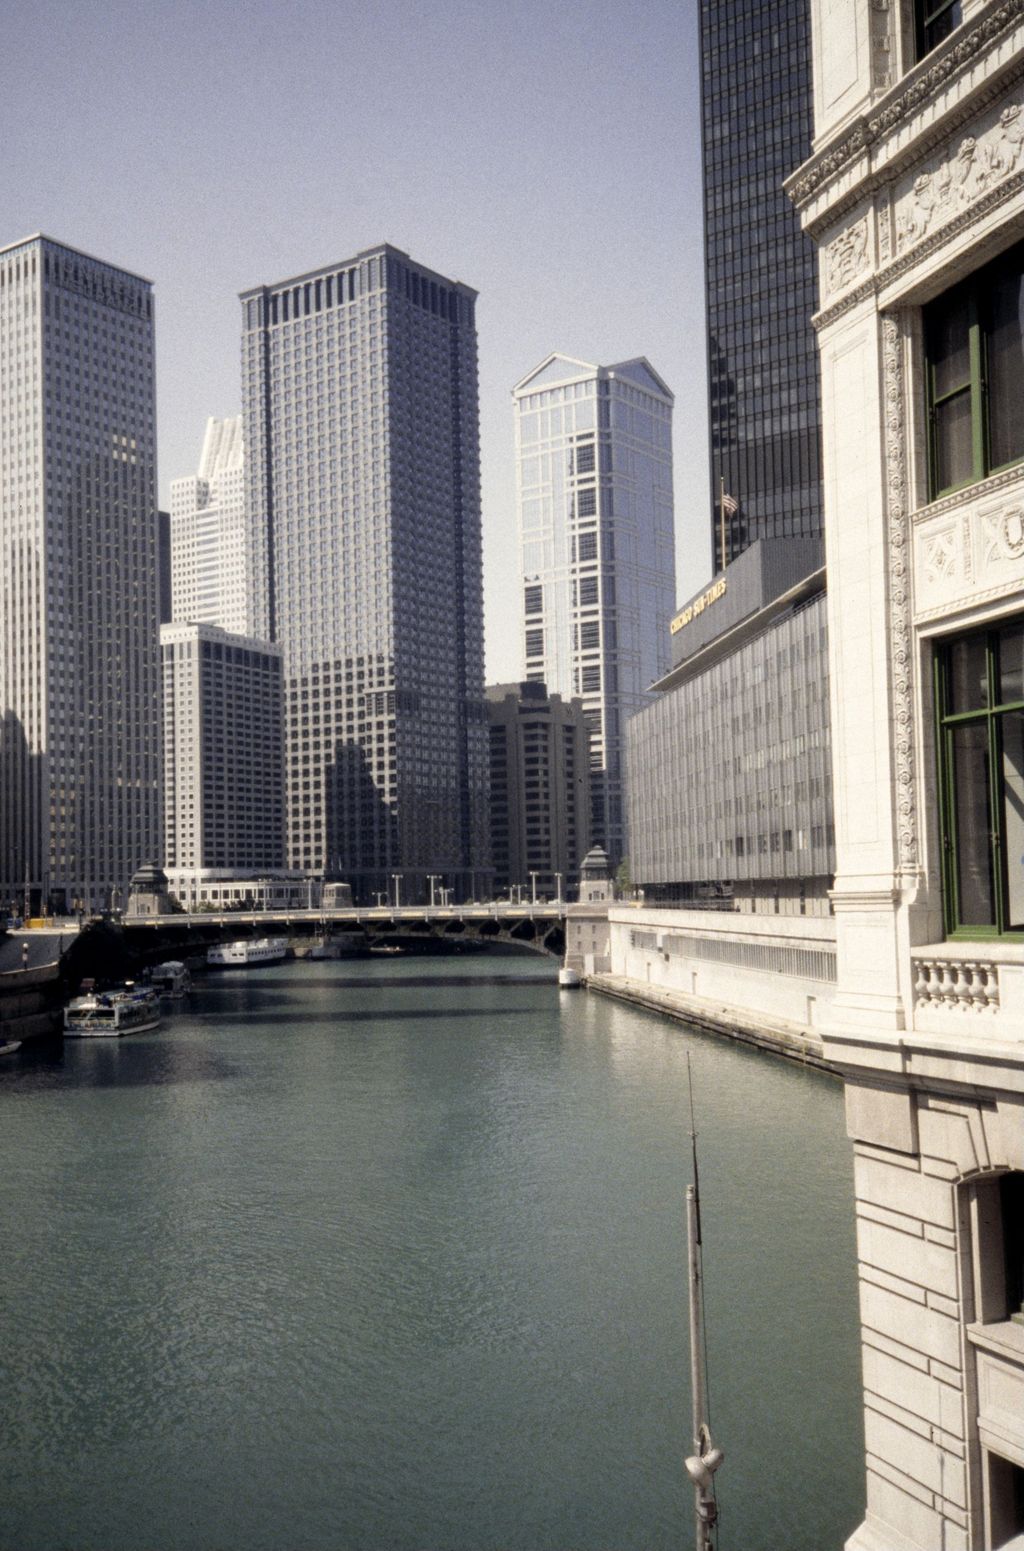 Miniature of Chicago River and skyscrapers along Wacker Drive